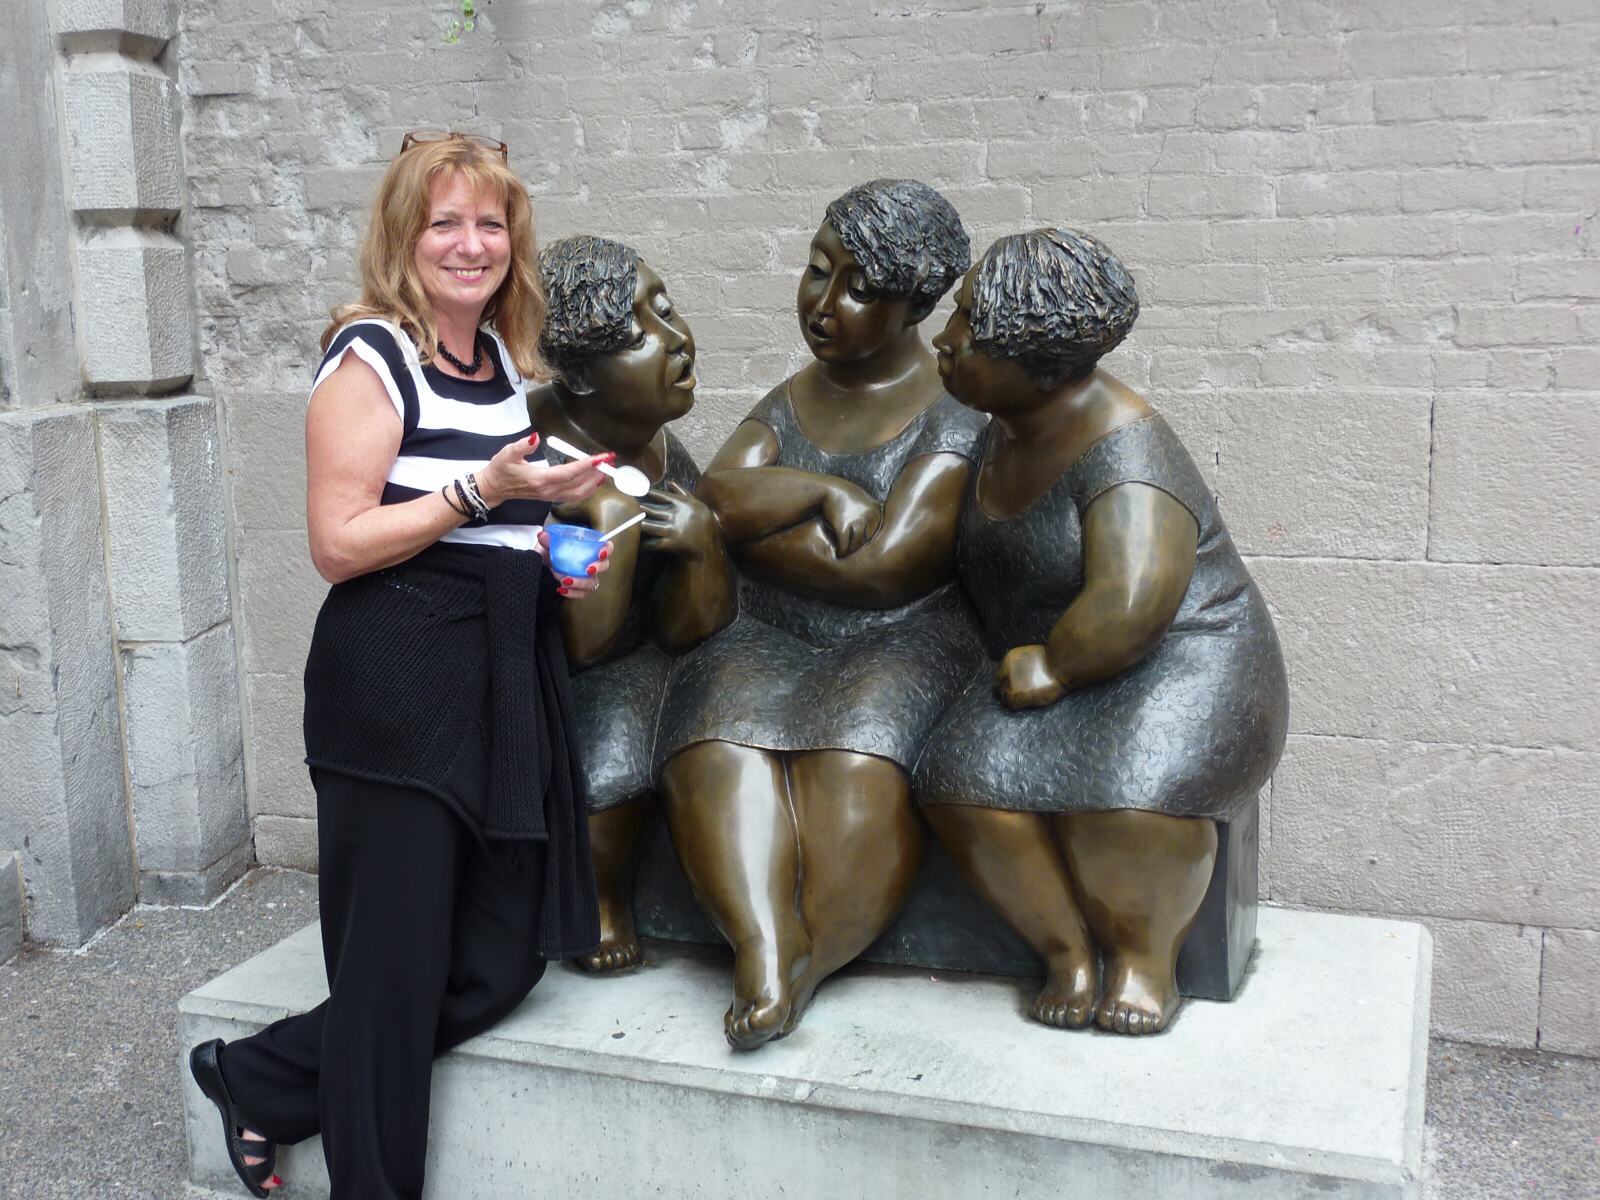 Les chuchoteuses (the gossips) sculpture in Montreal, Canada